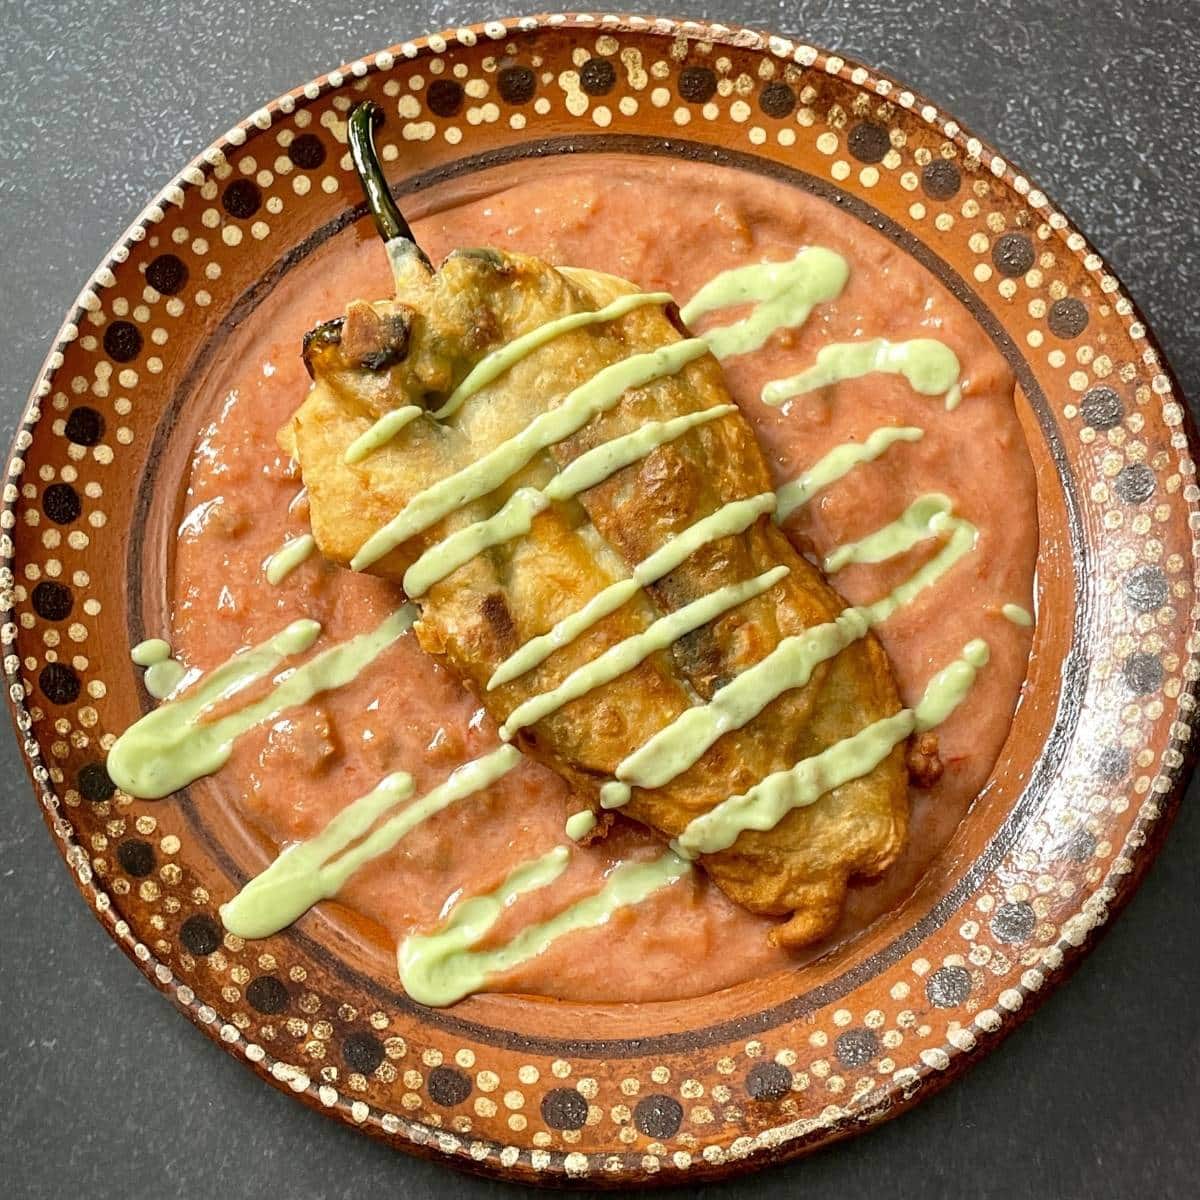 Vegan chile relleno on top of red chile sauce and topped with avocado cream sauce.